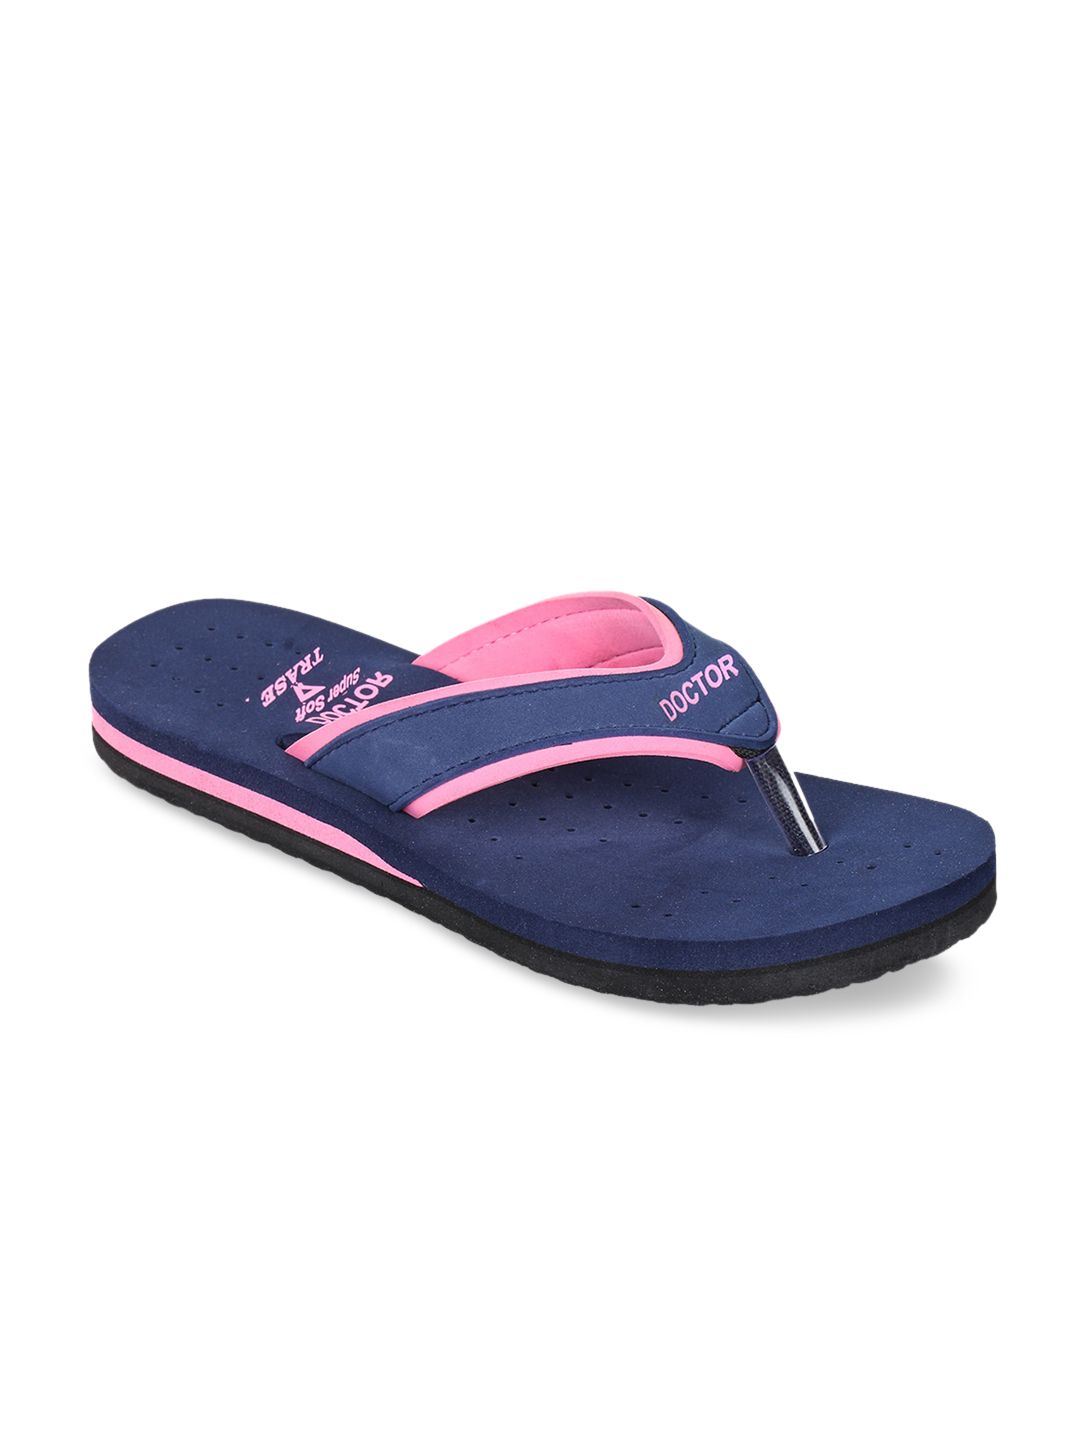 TRASE Women Navy Blue & Pink Colourblocked Thong Flip-Flops Price in India